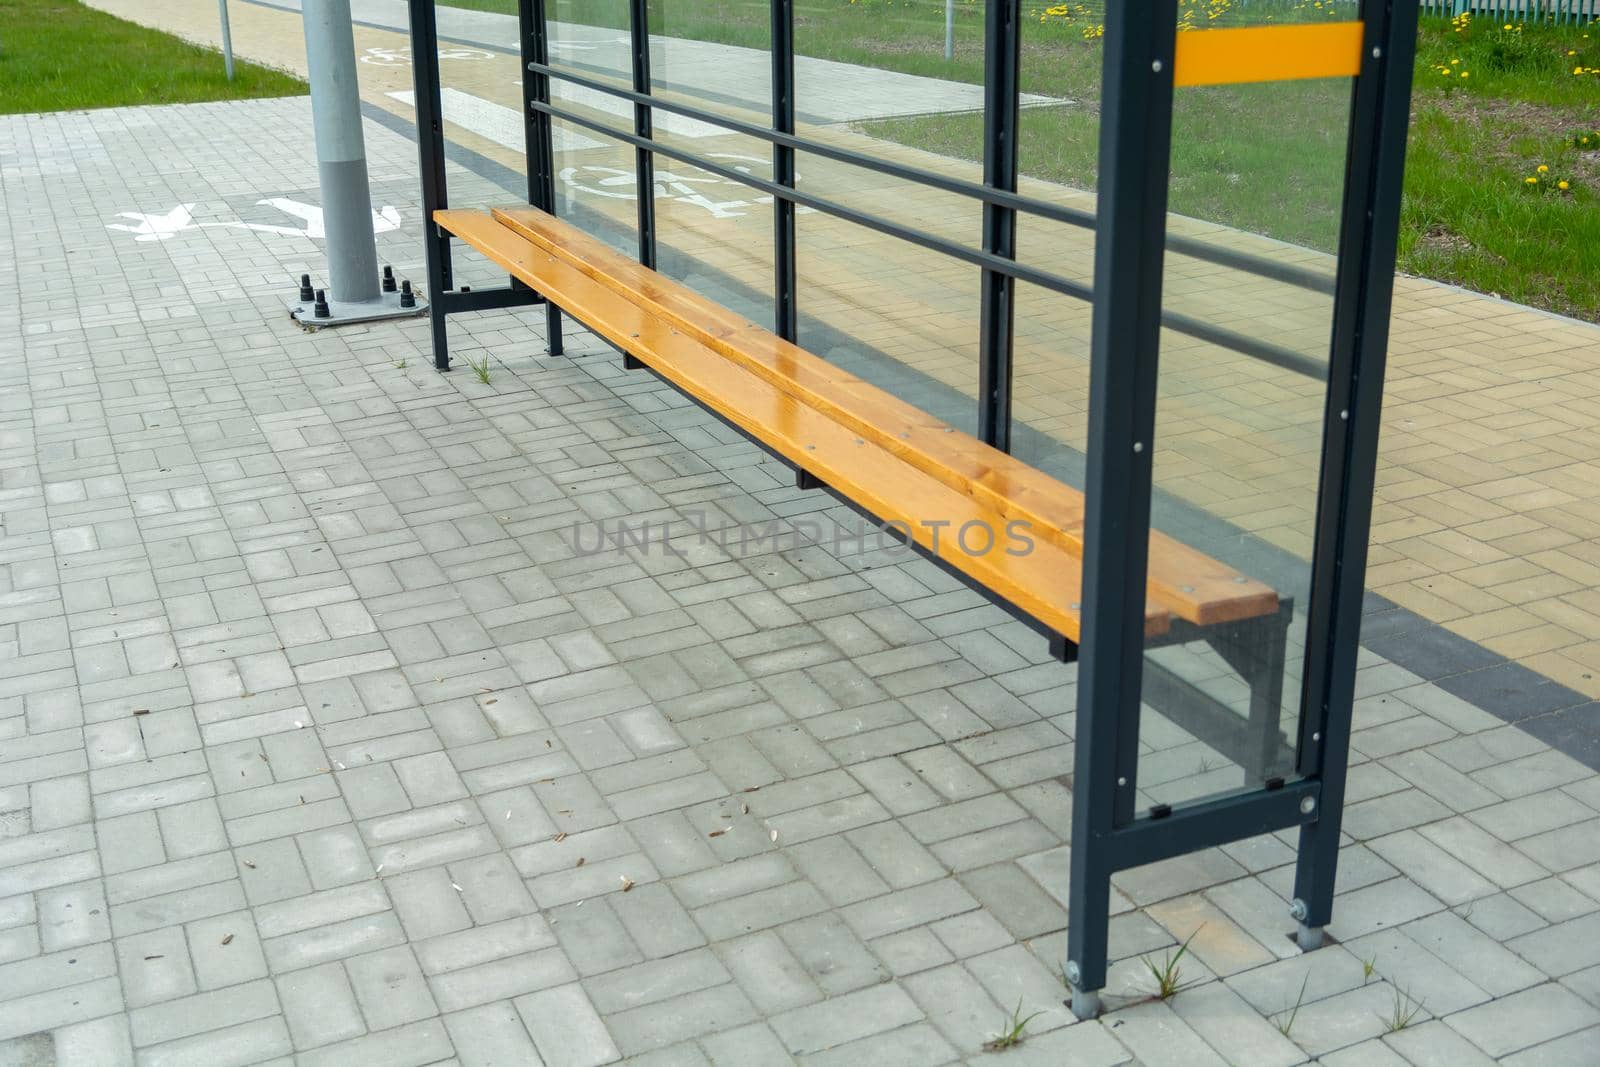 Glass shelter bus stop with wooden bench by darekb22